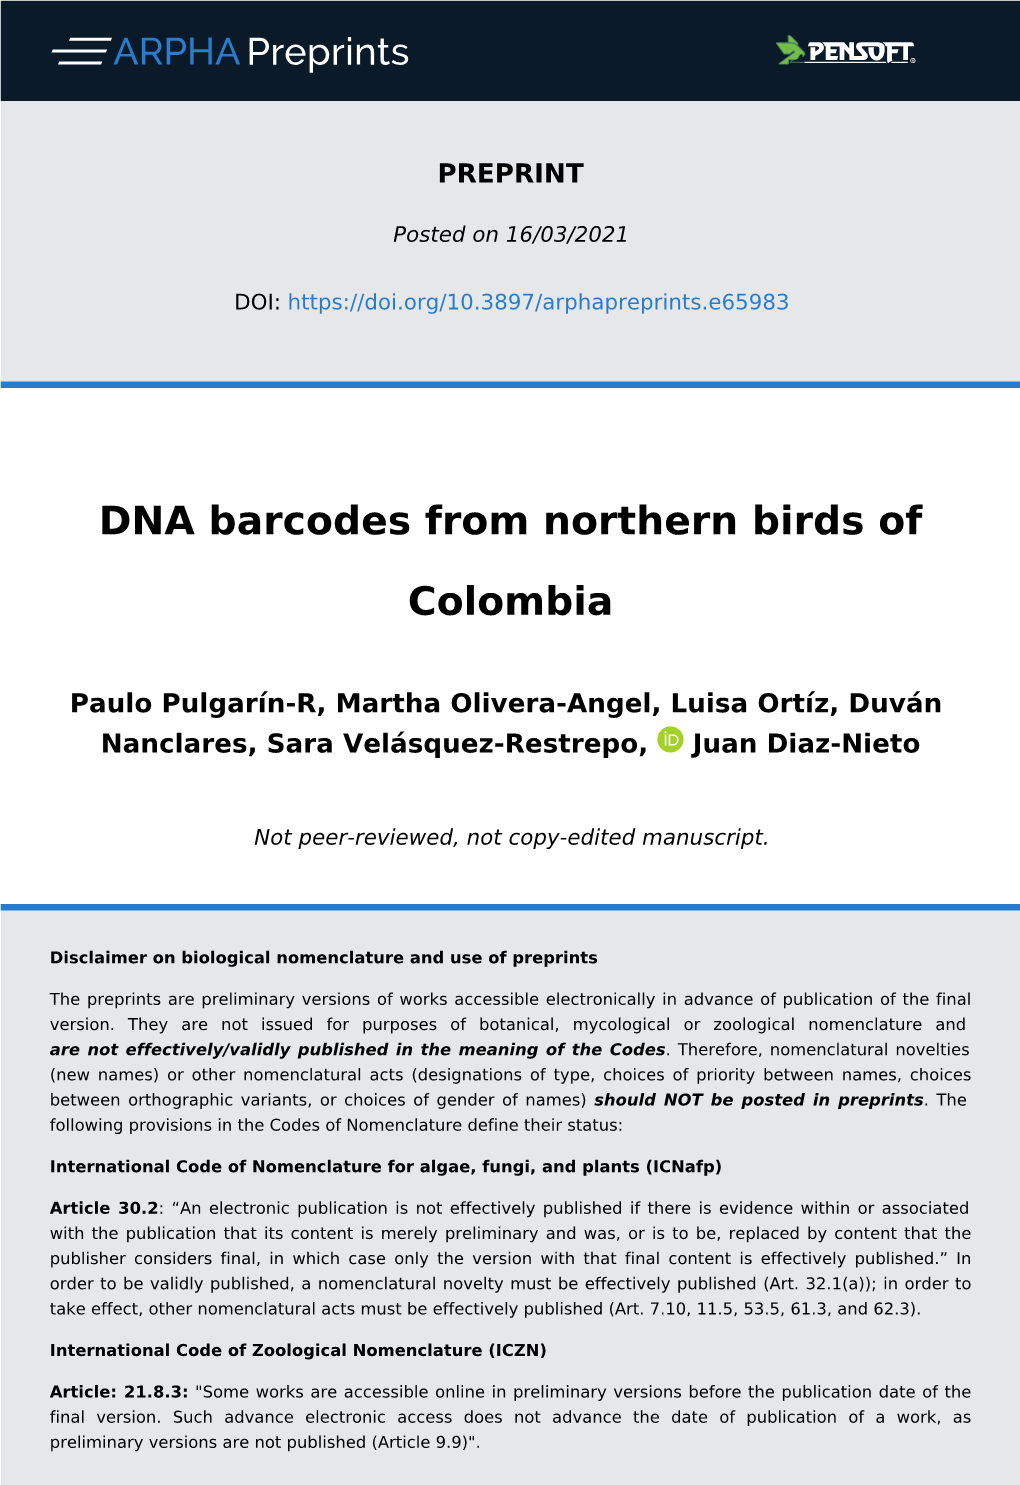 DNA Barcodes from Northern Birds of Colombia